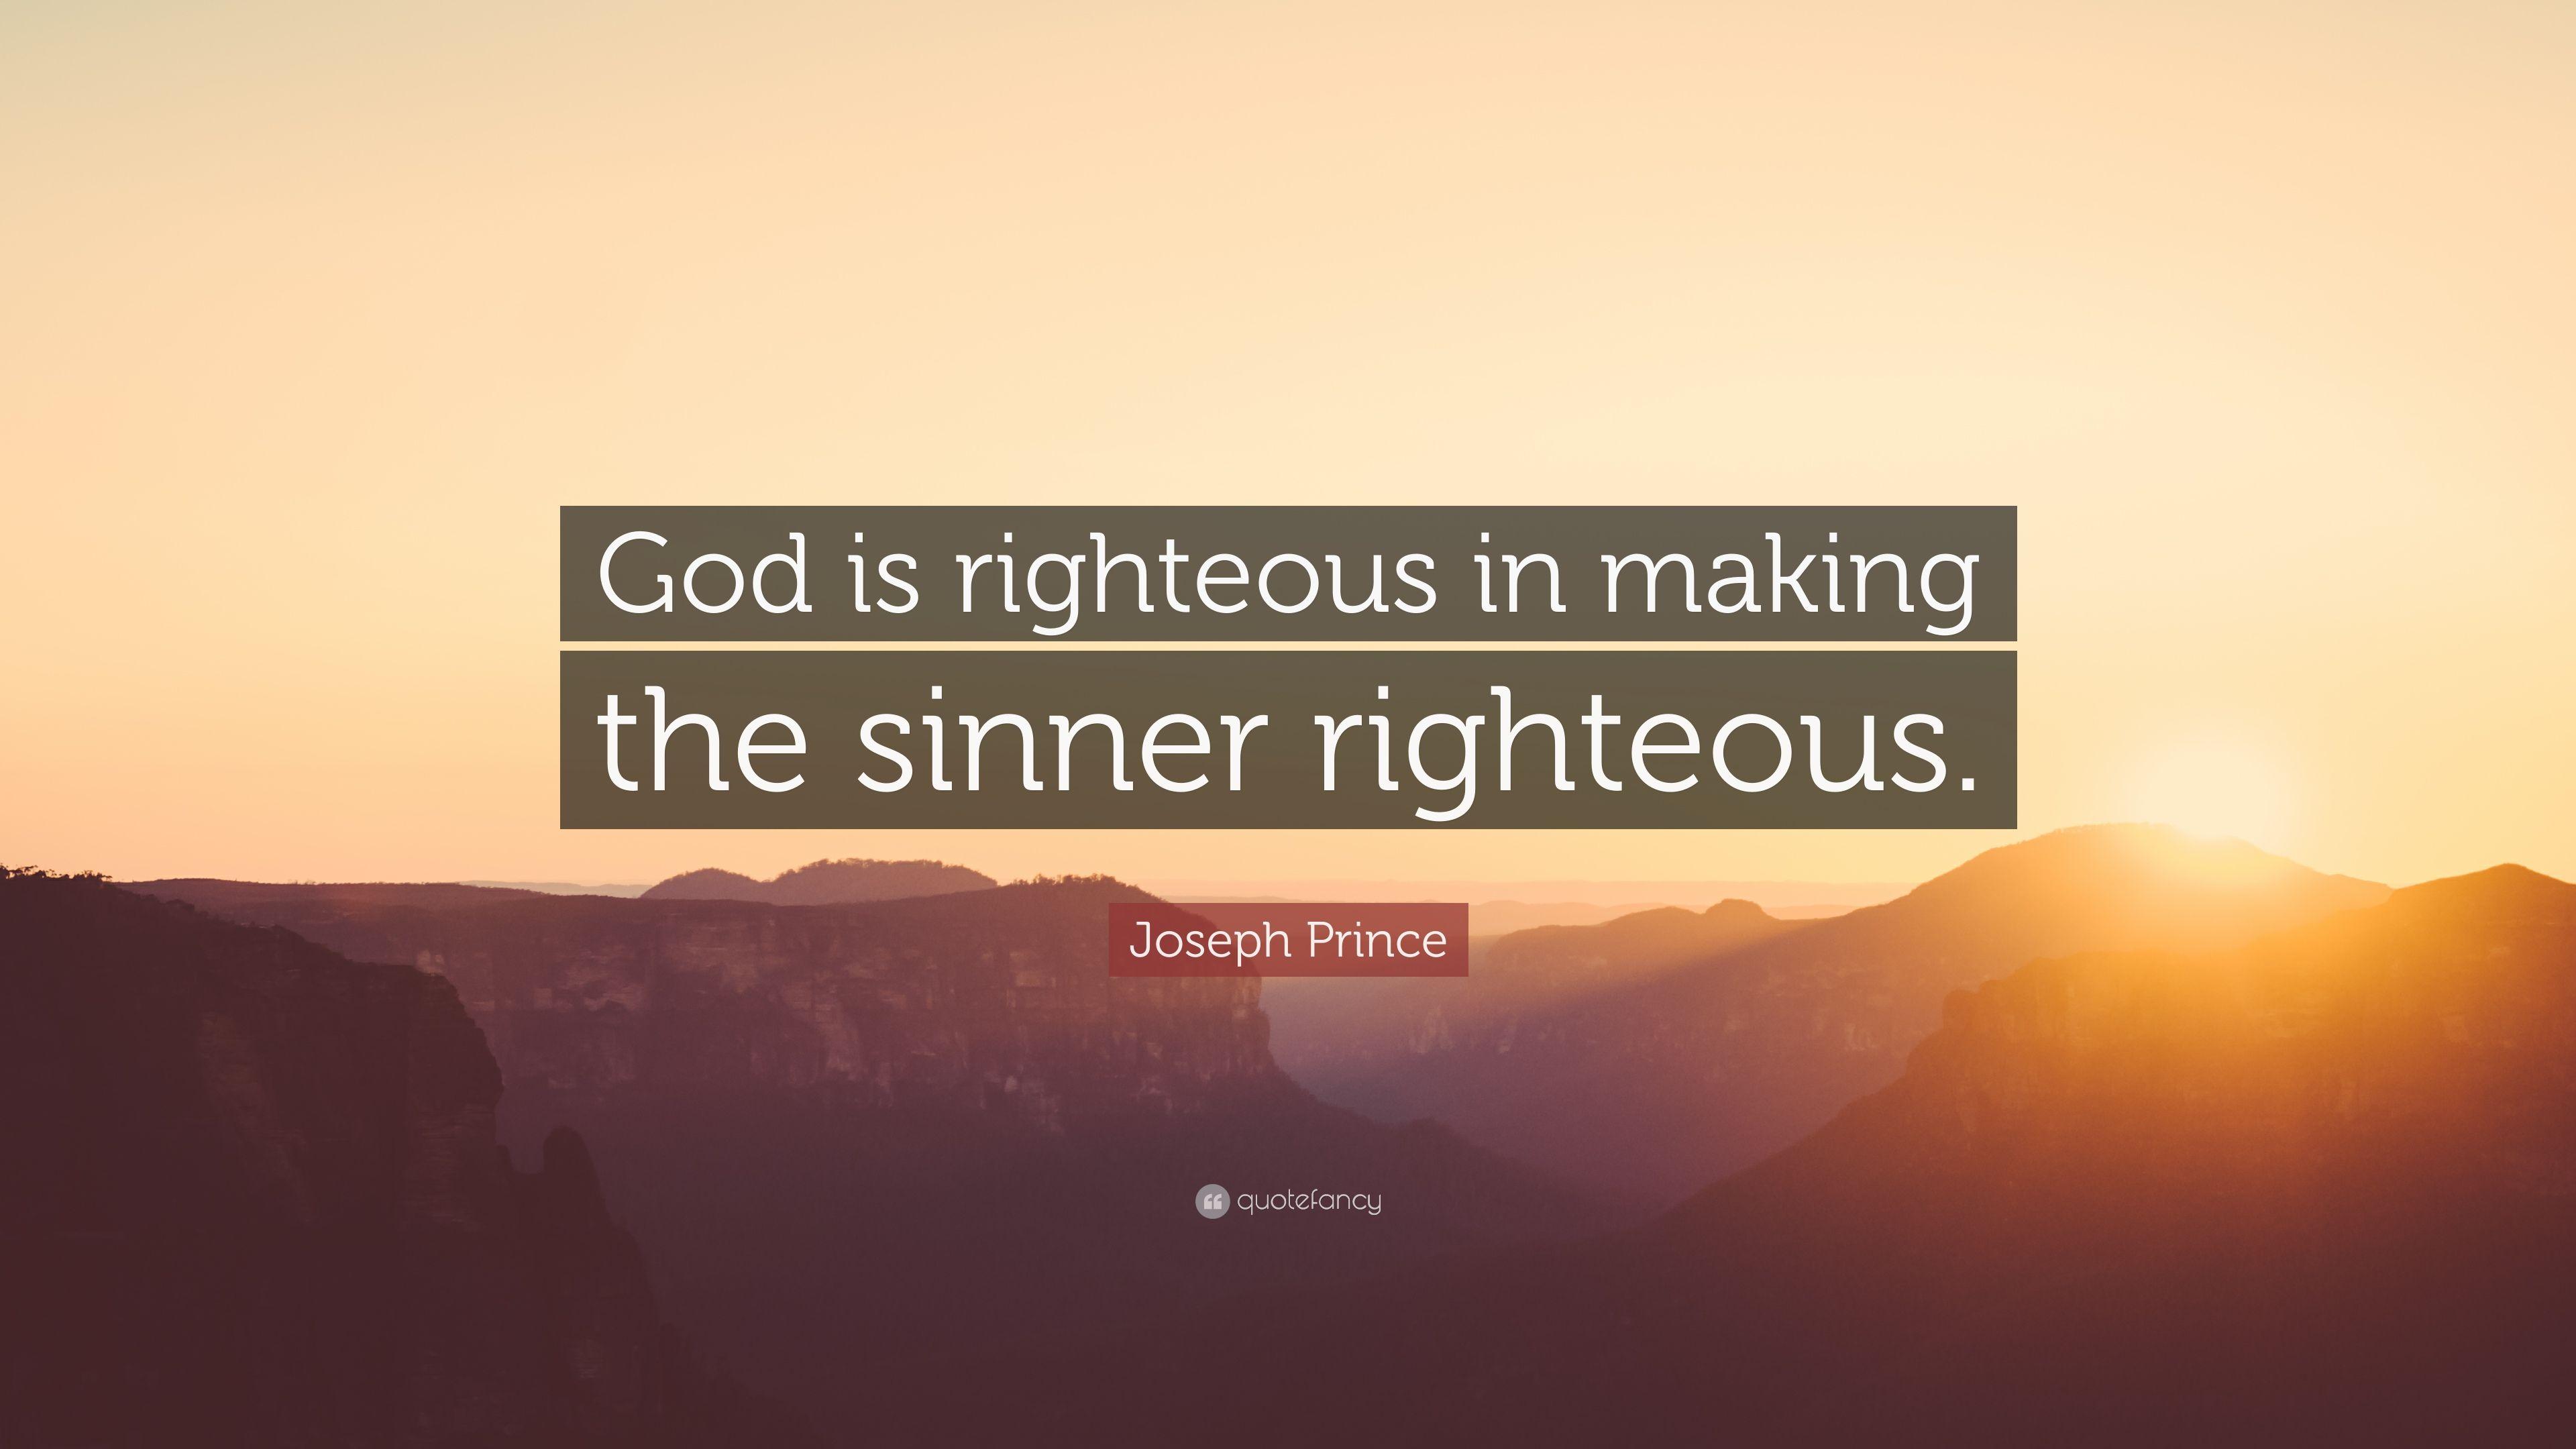 Joseph Prince Quote: “God is righteous in making the sinner